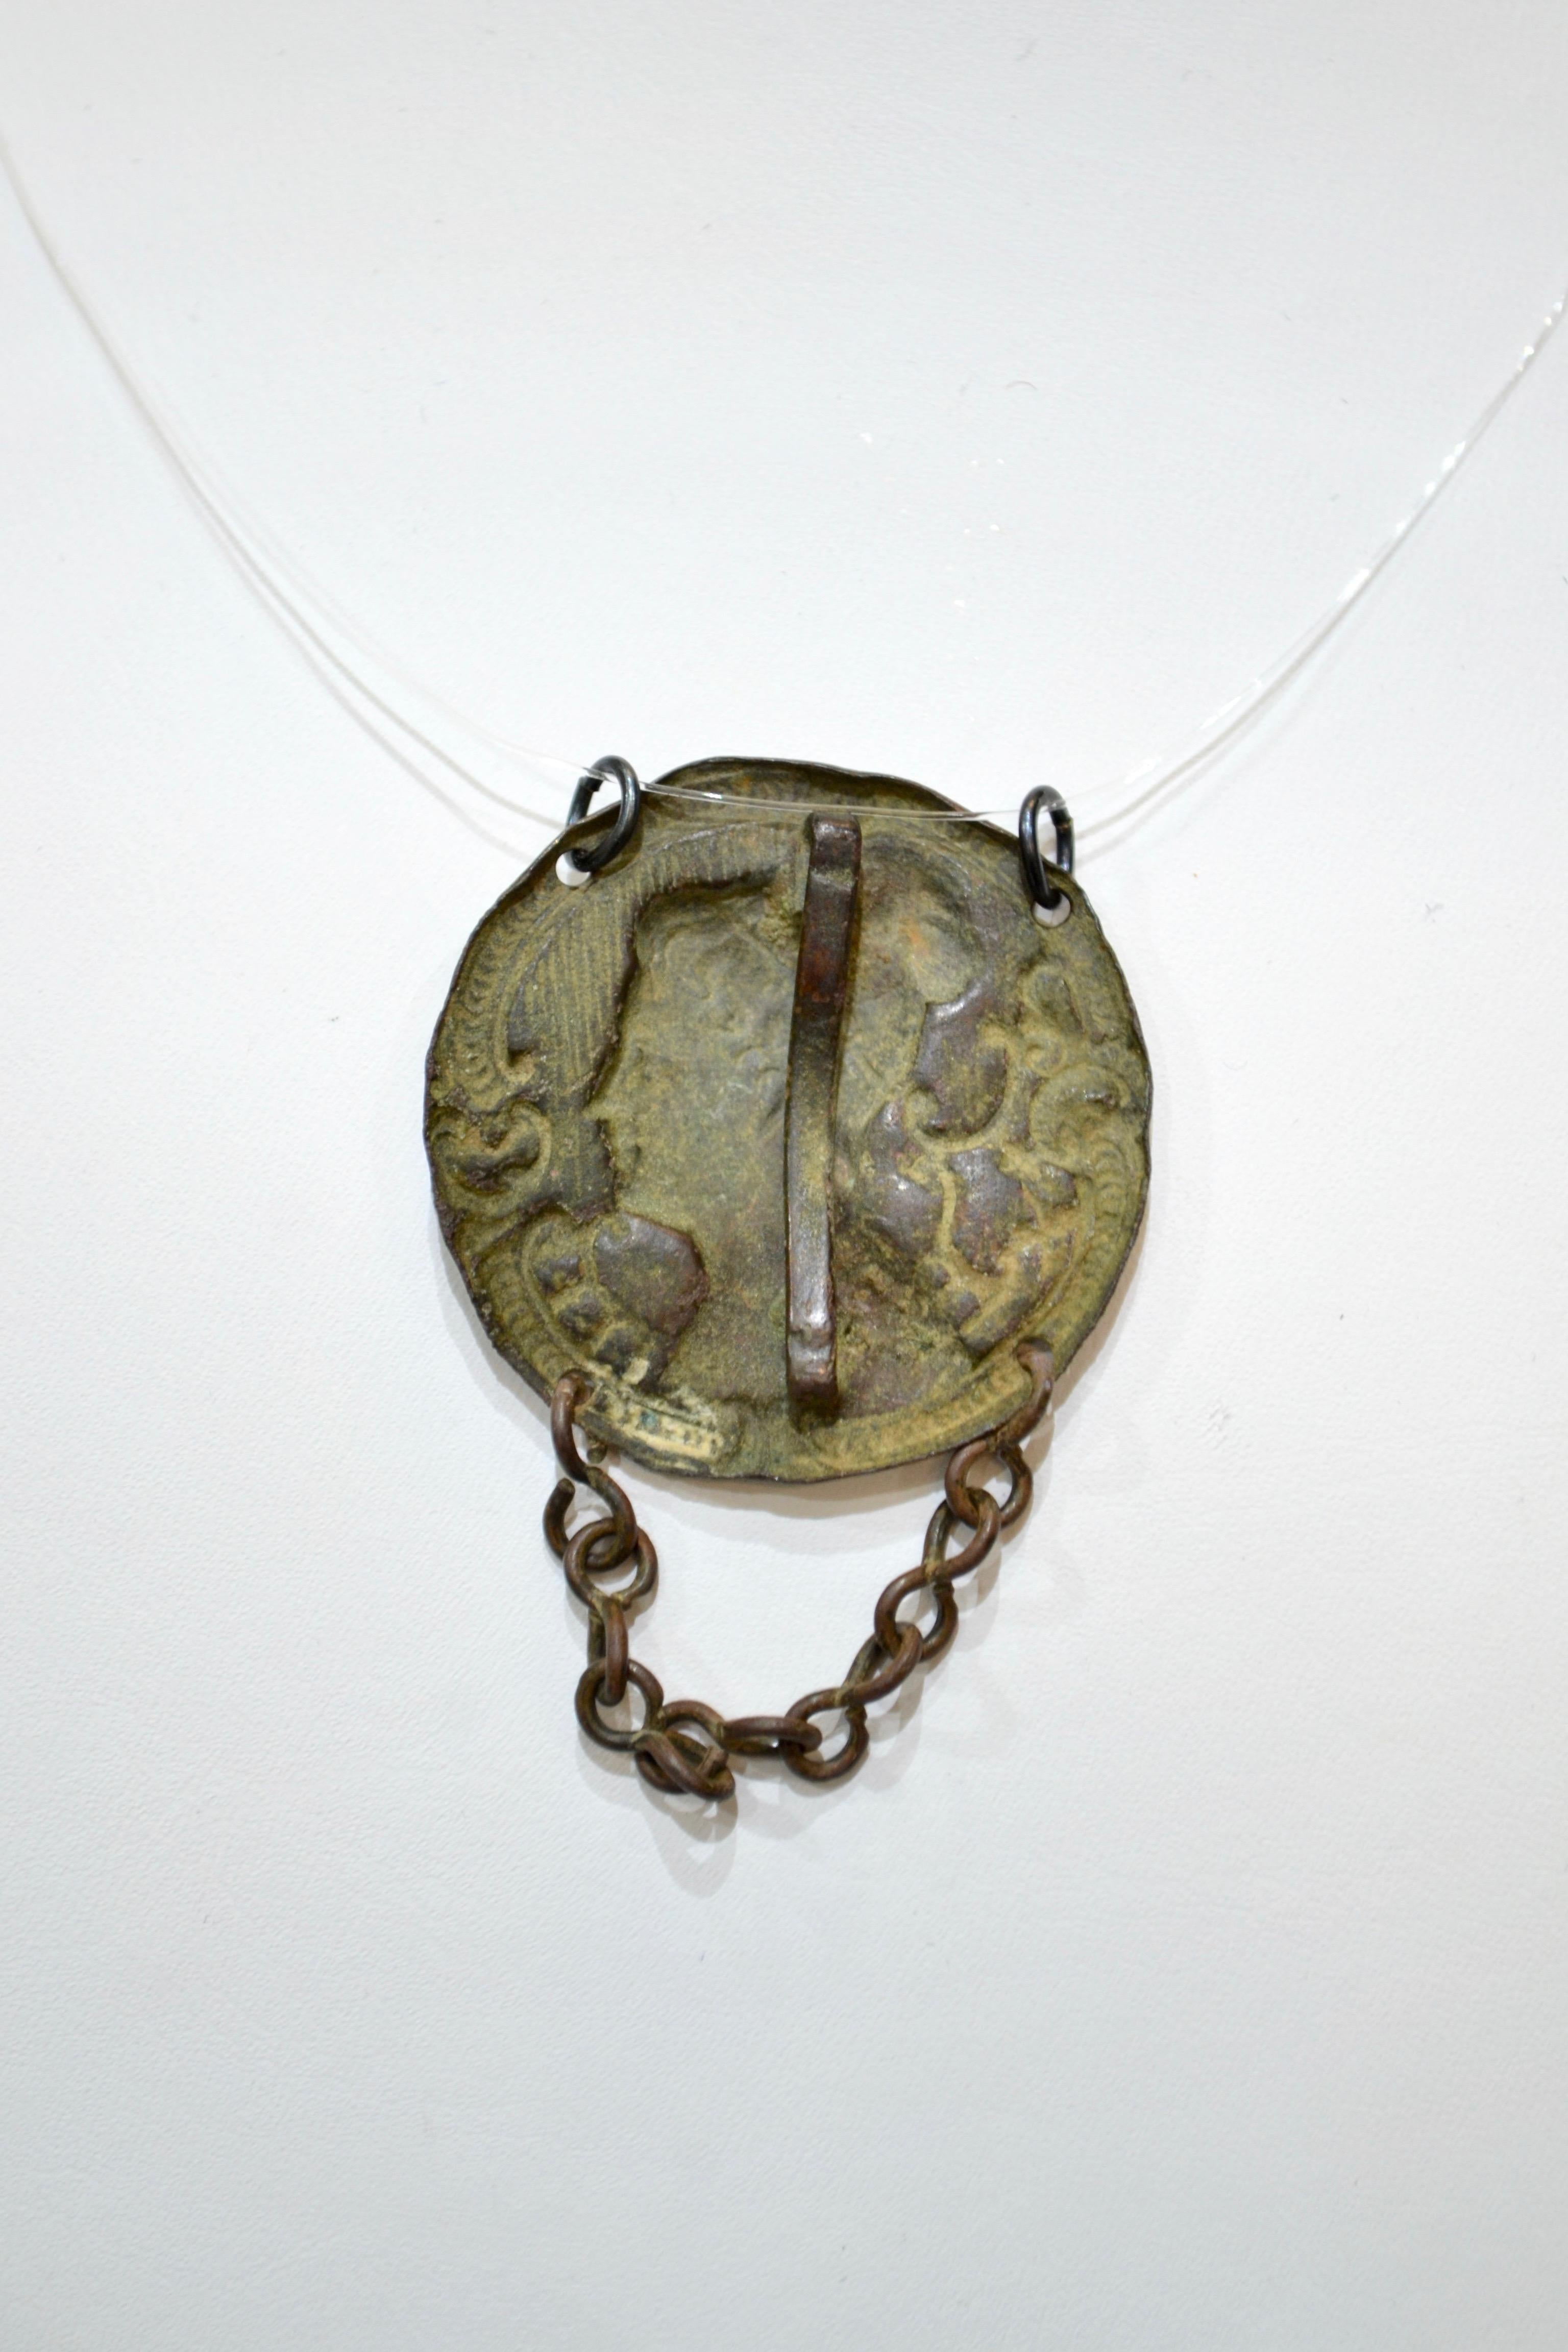 Post Medieval French Gold-Gilded Bronze Necklace with Bust and Chain set in a transparent necklace cord with a .925 sterling silver clasp. Professionally cleaned and polished to show original details. Obtained from an old Austrian collection,